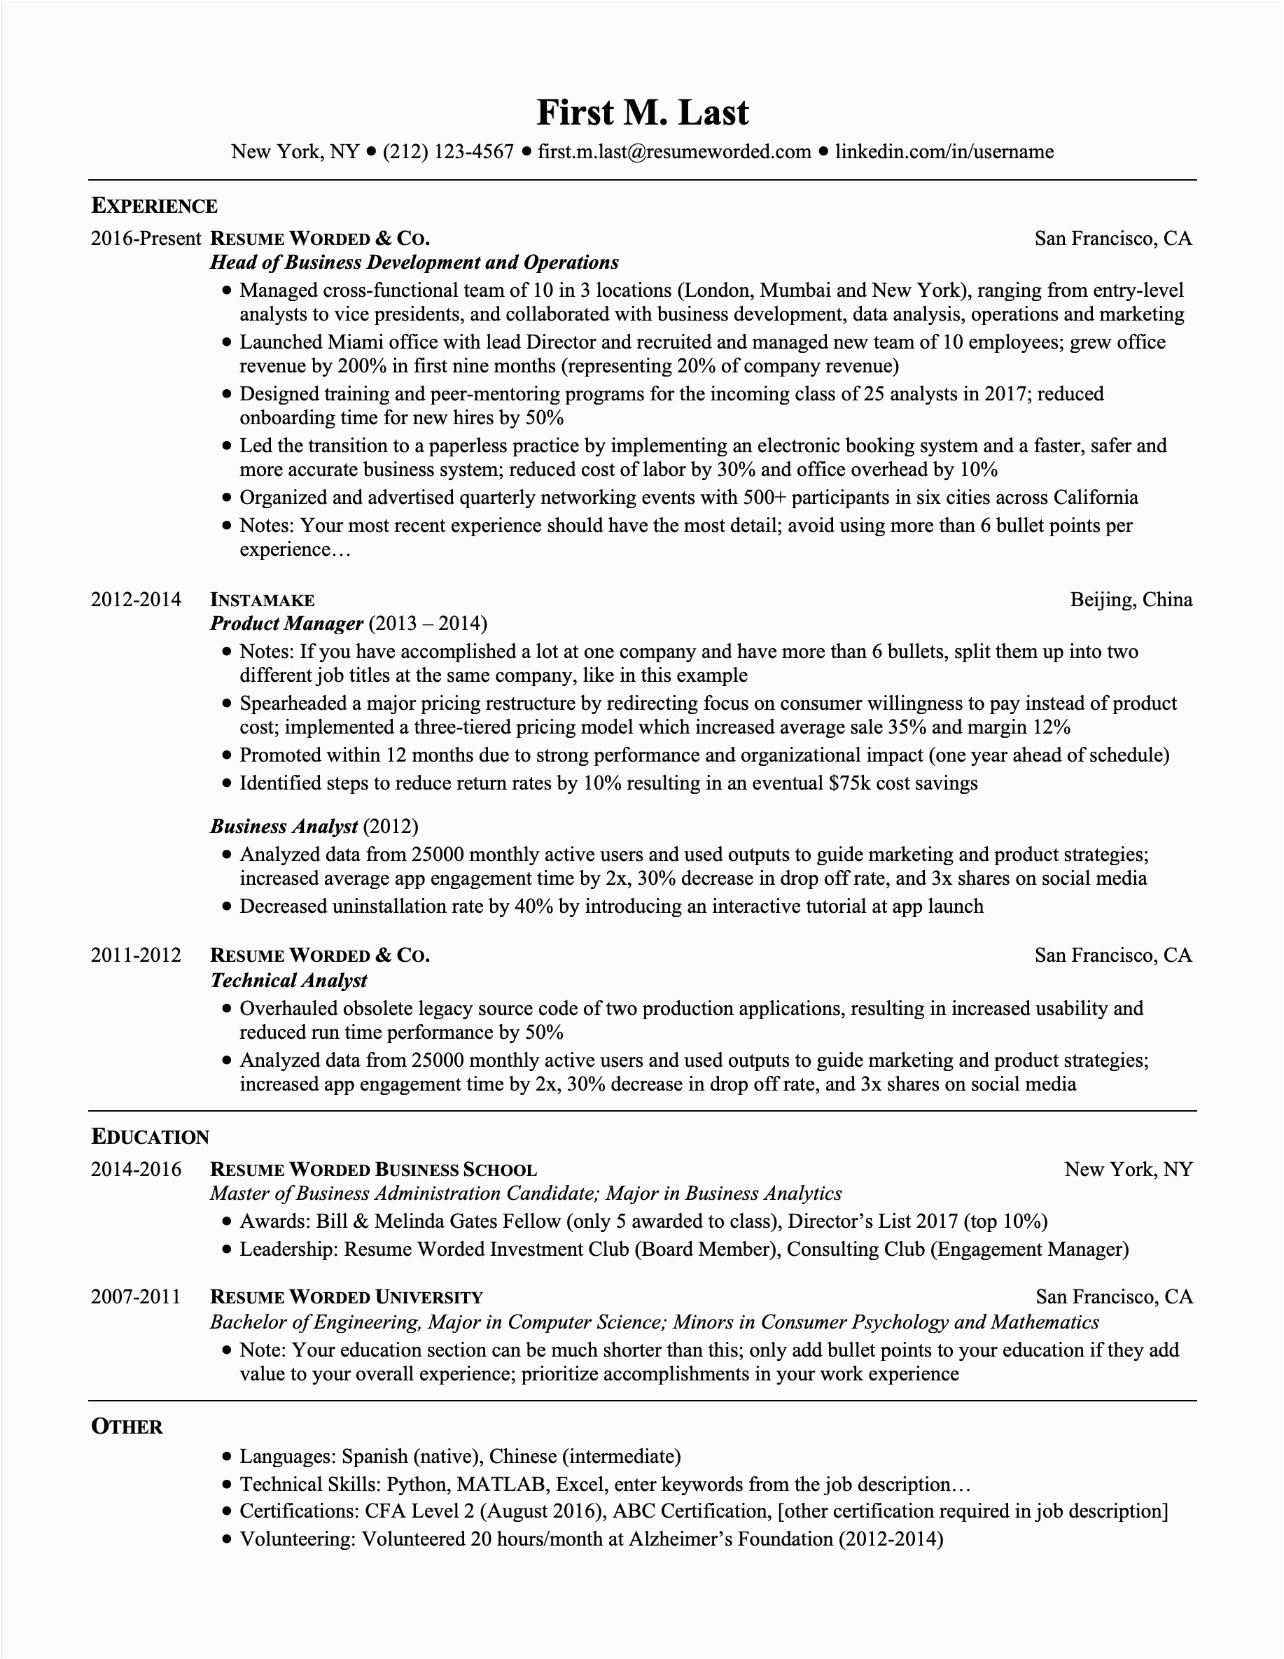 Resume Template with Multiple Position at Same Company Professional Sample Resume Multiple Positions Same Pany